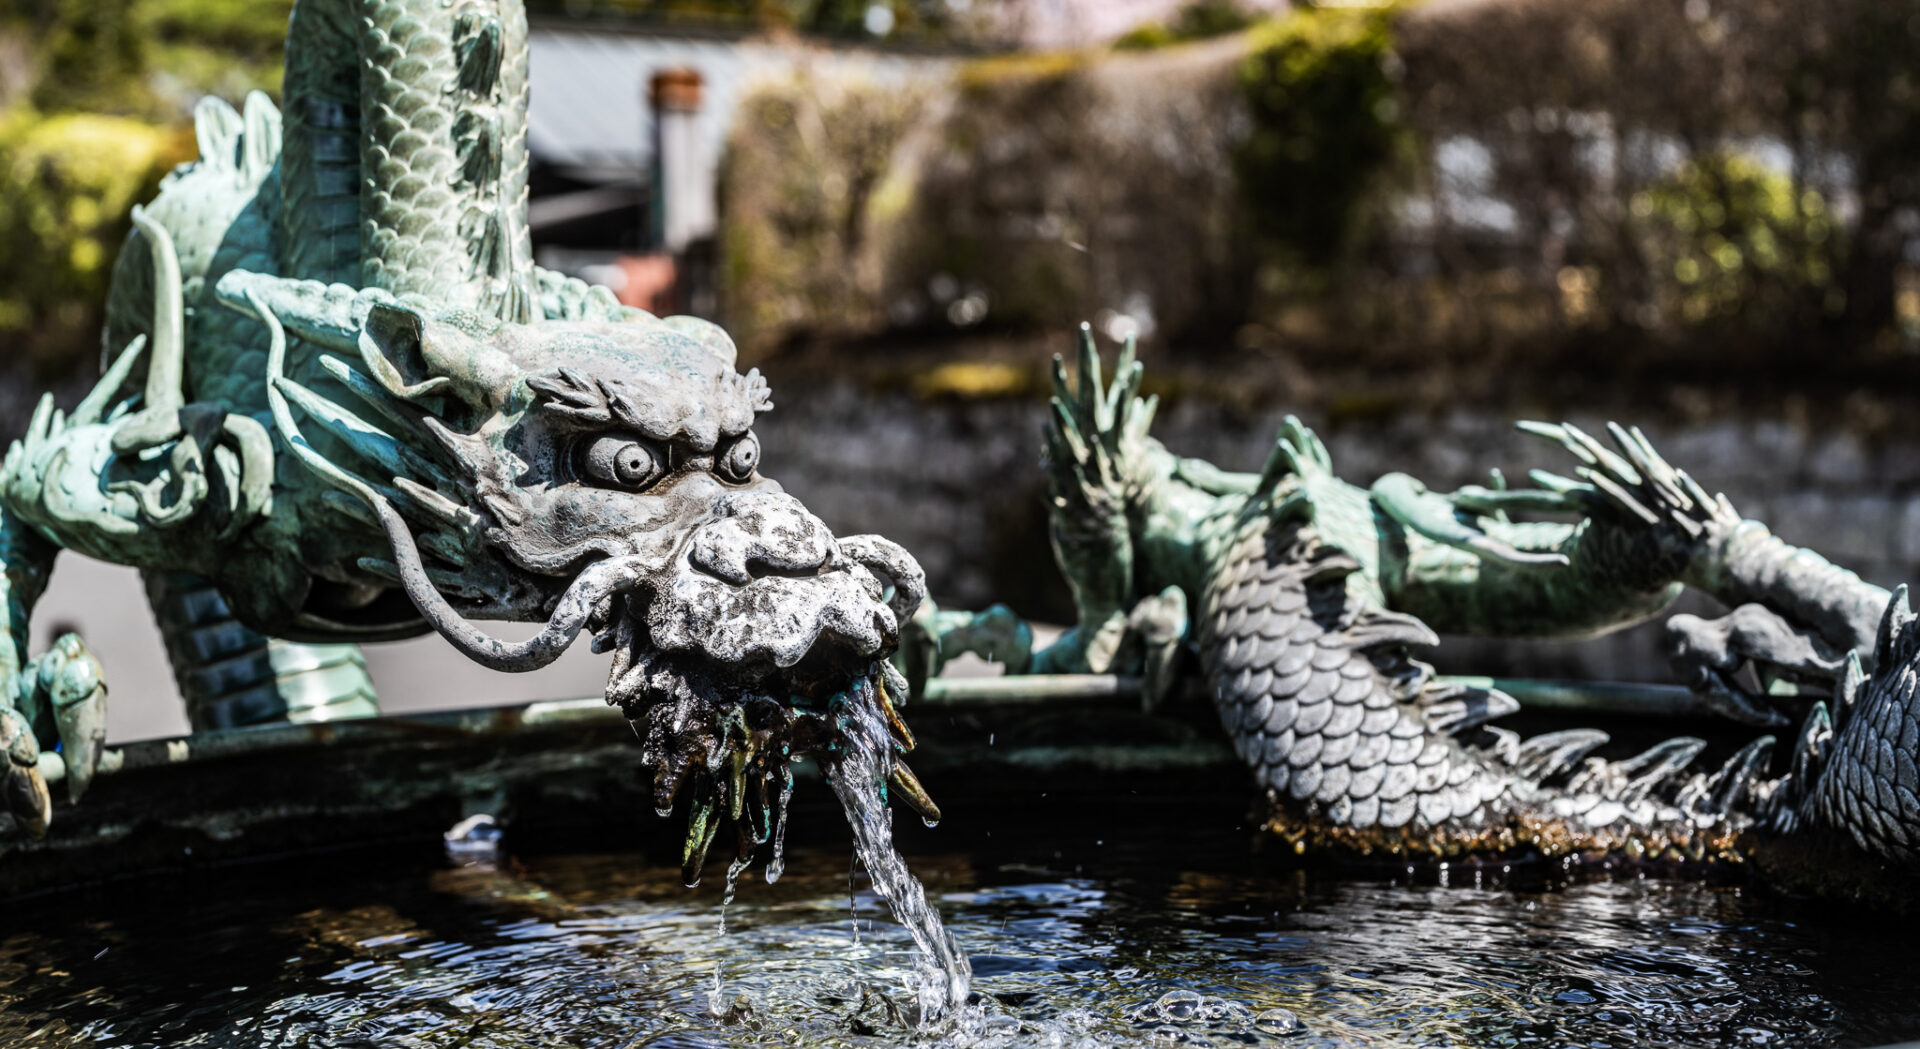 The dragon fountain in front of Rinnoji Temple